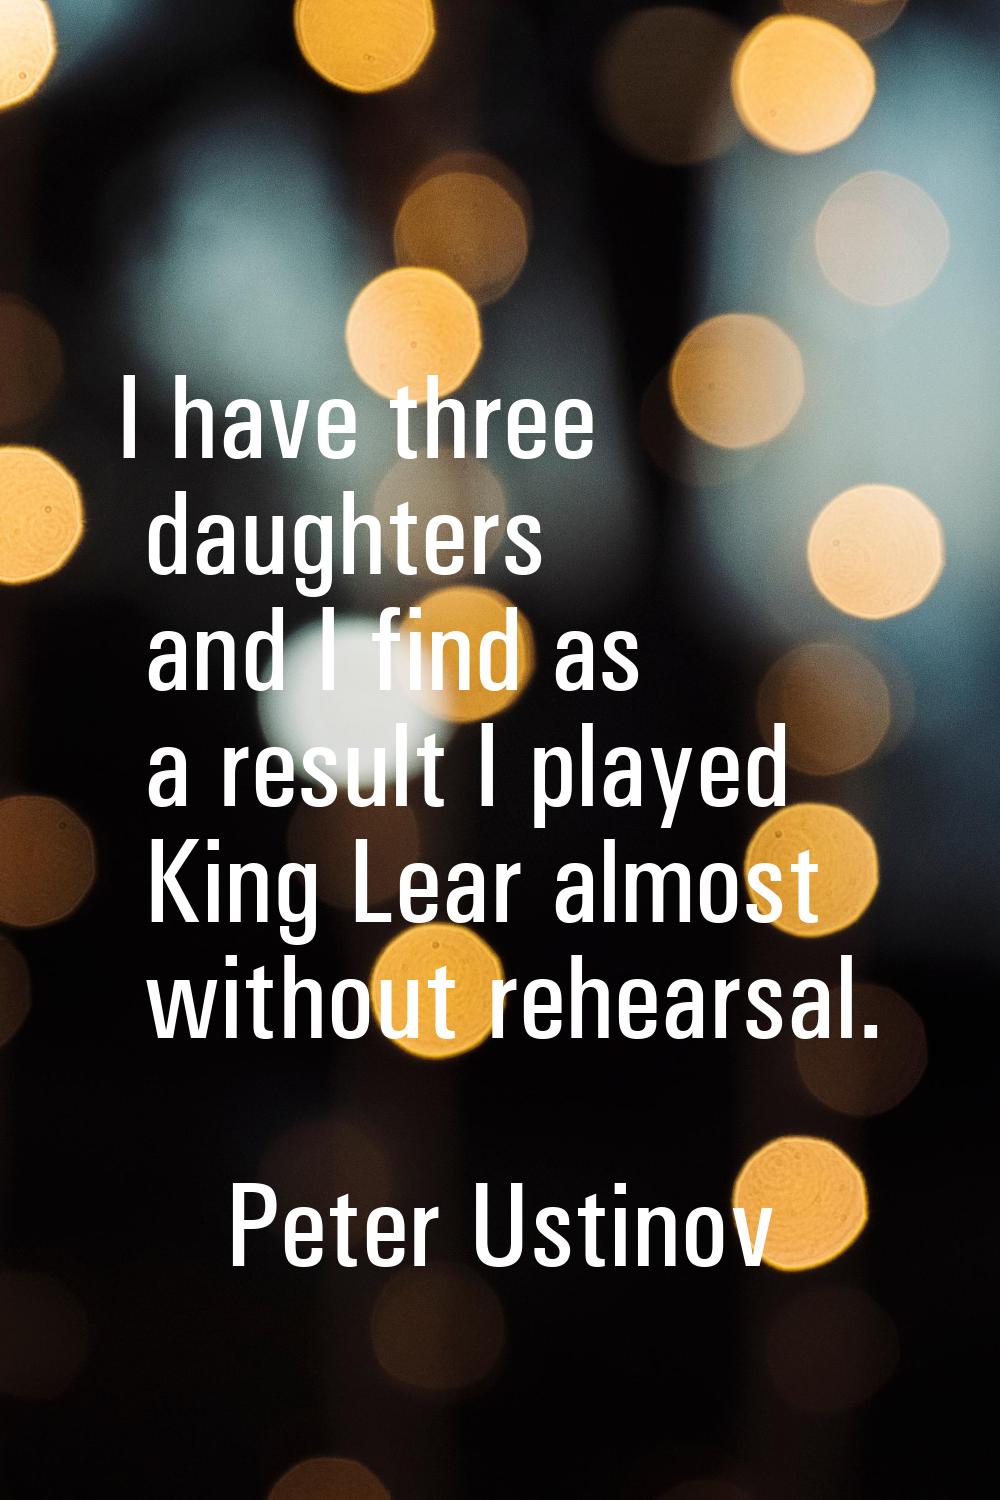 I have three daughters and I find as a result I played King Lear almost without rehearsal.